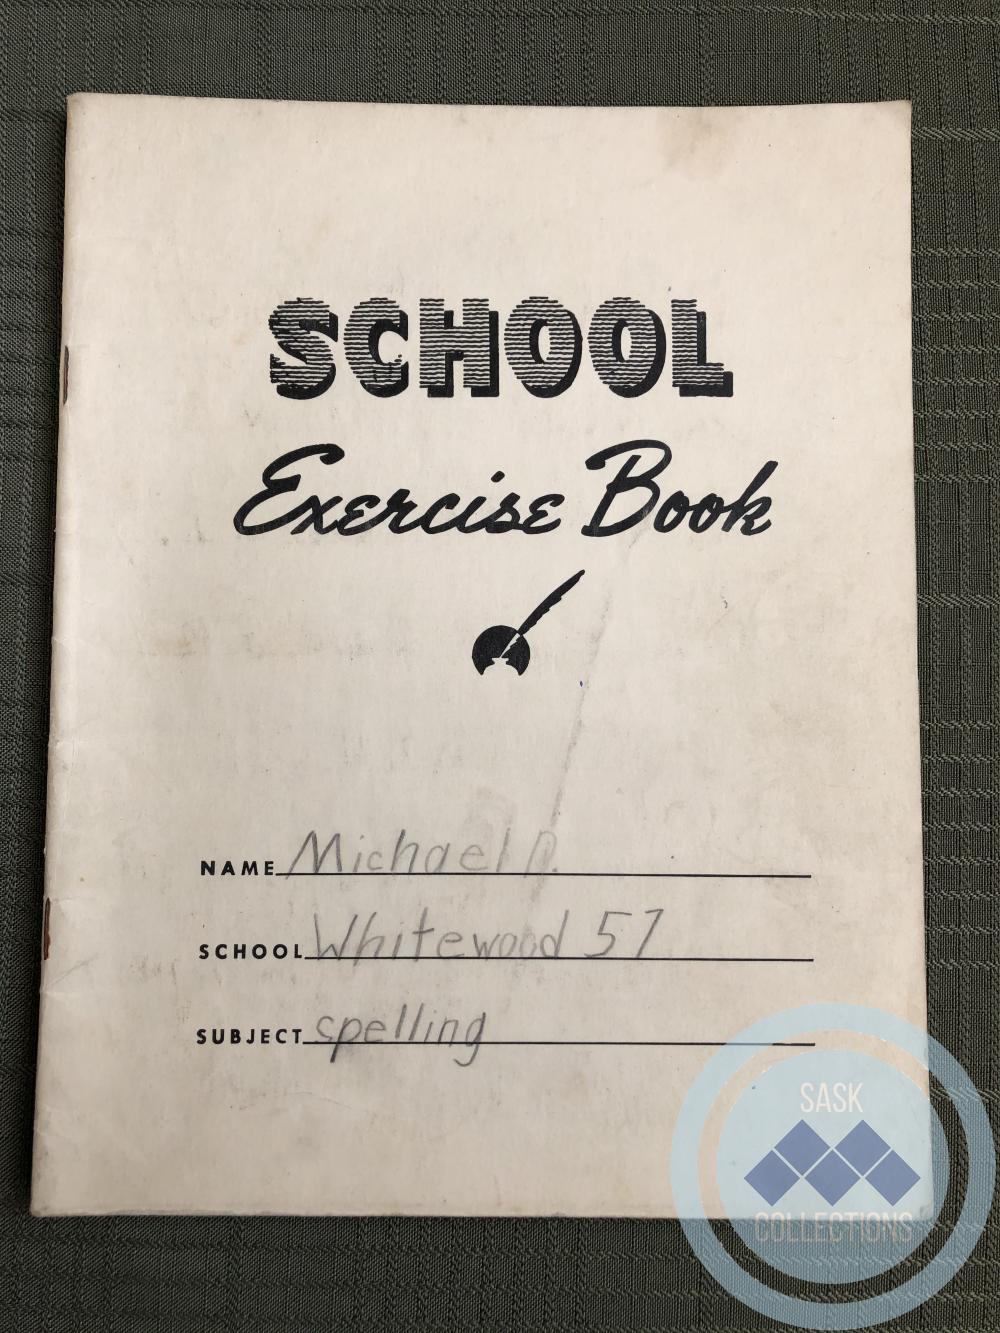 Exercise Book - Spelling